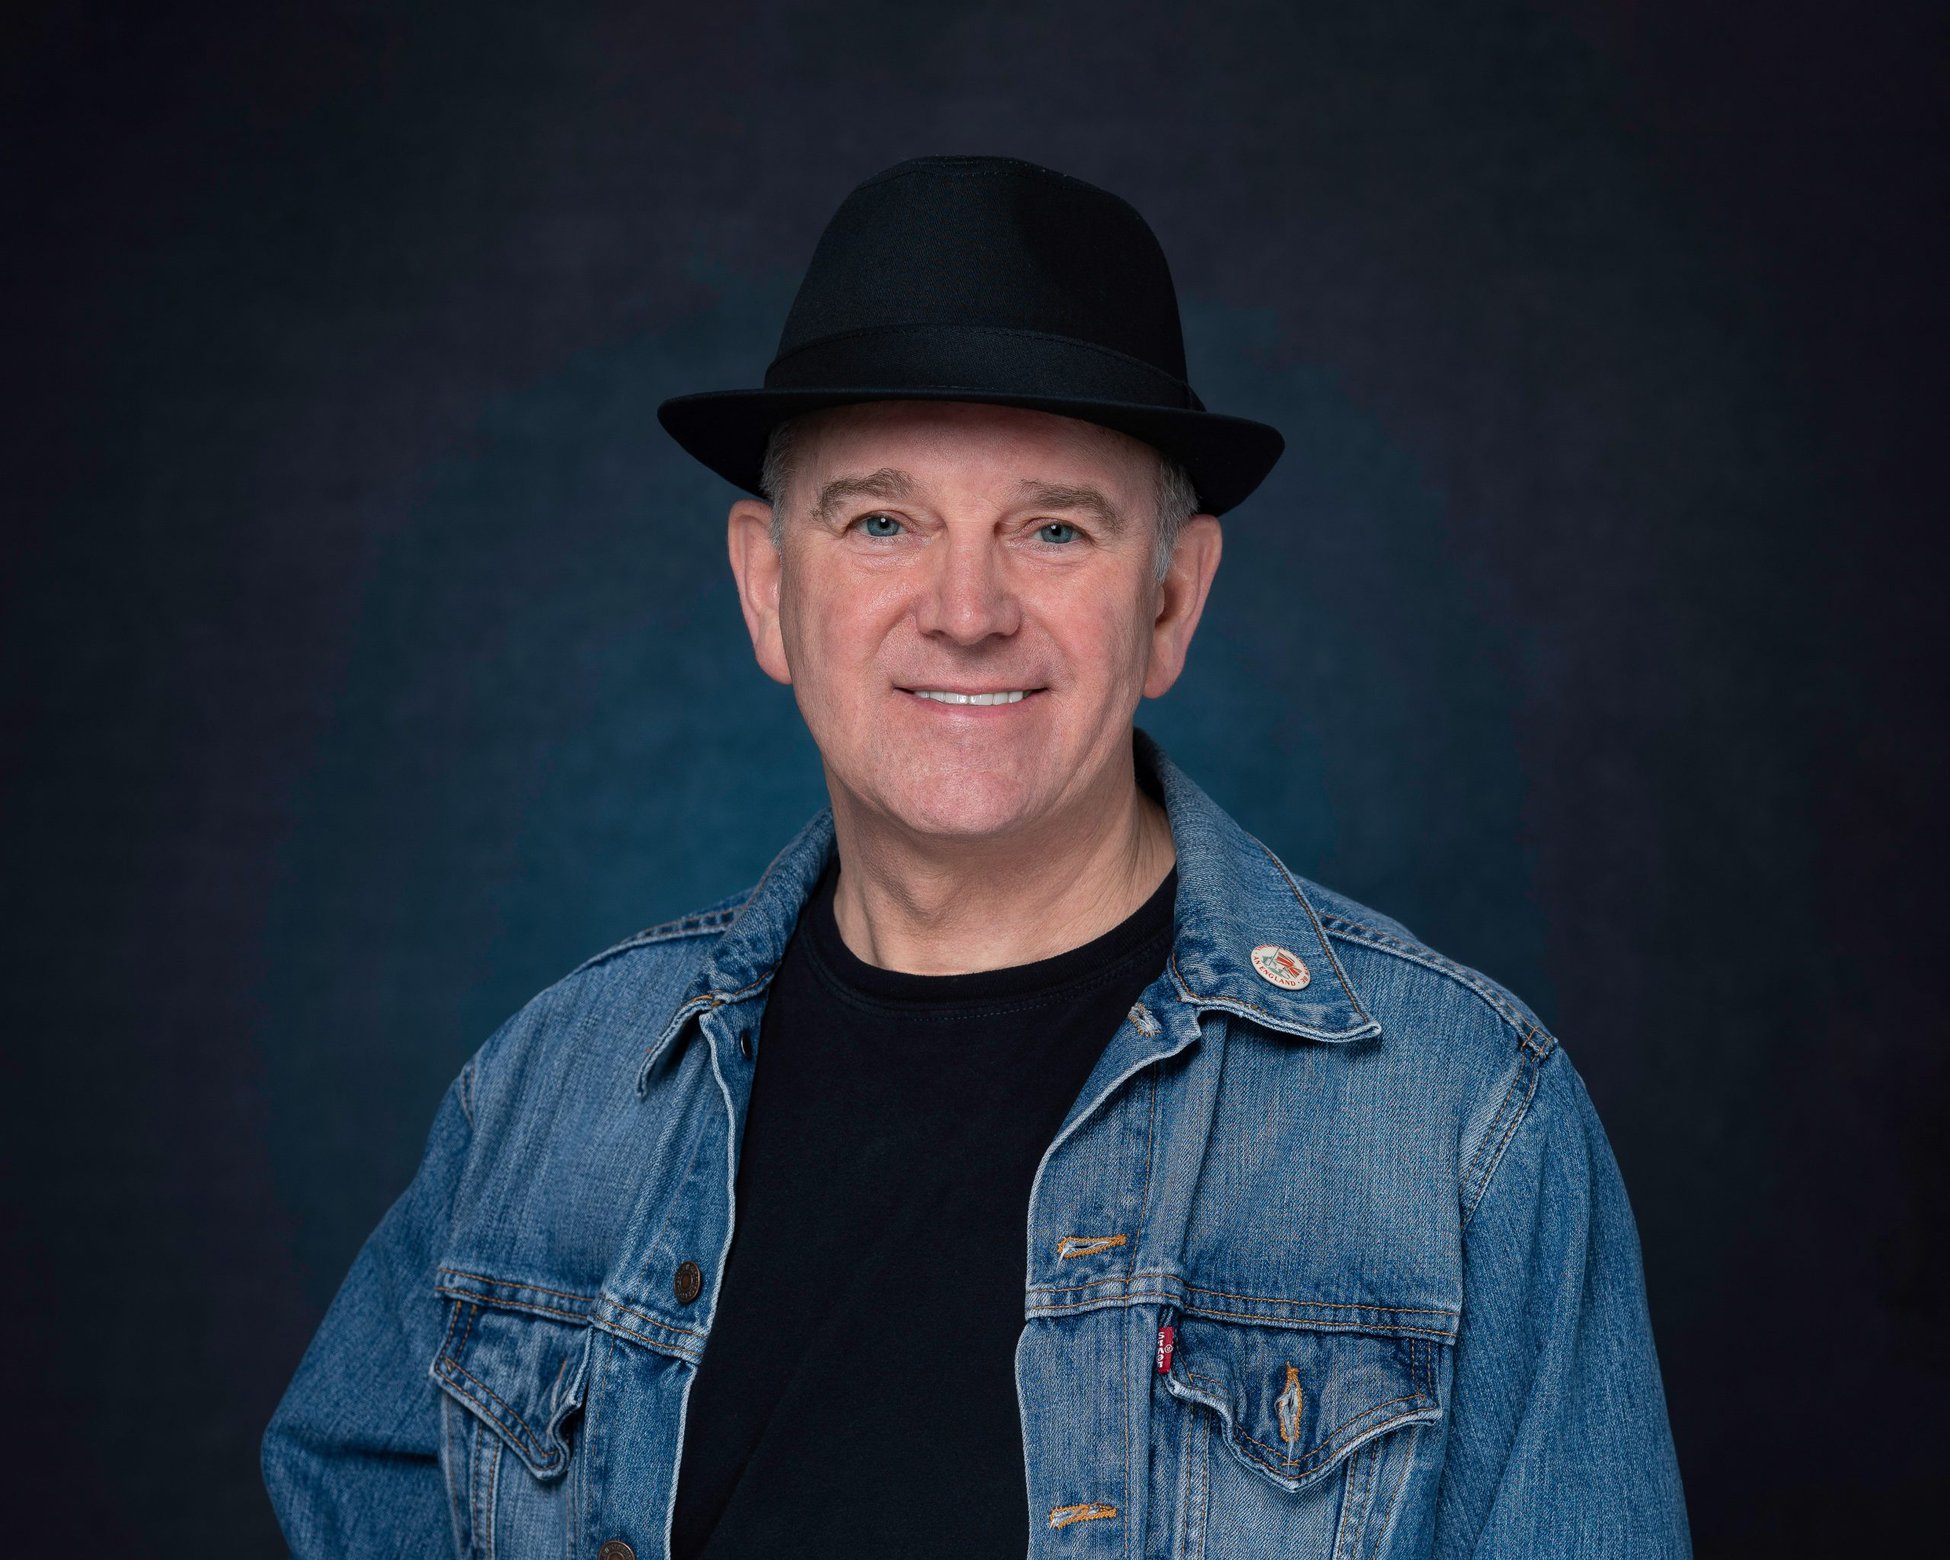 Professional Headshot Photographer Chris Cottrell looking directly at the camera lens for a headshot. Wearing his signature black fedora style hat, black tee shirt and denim jacket. Set against a grey, textured backdrop with added blue light behind. 